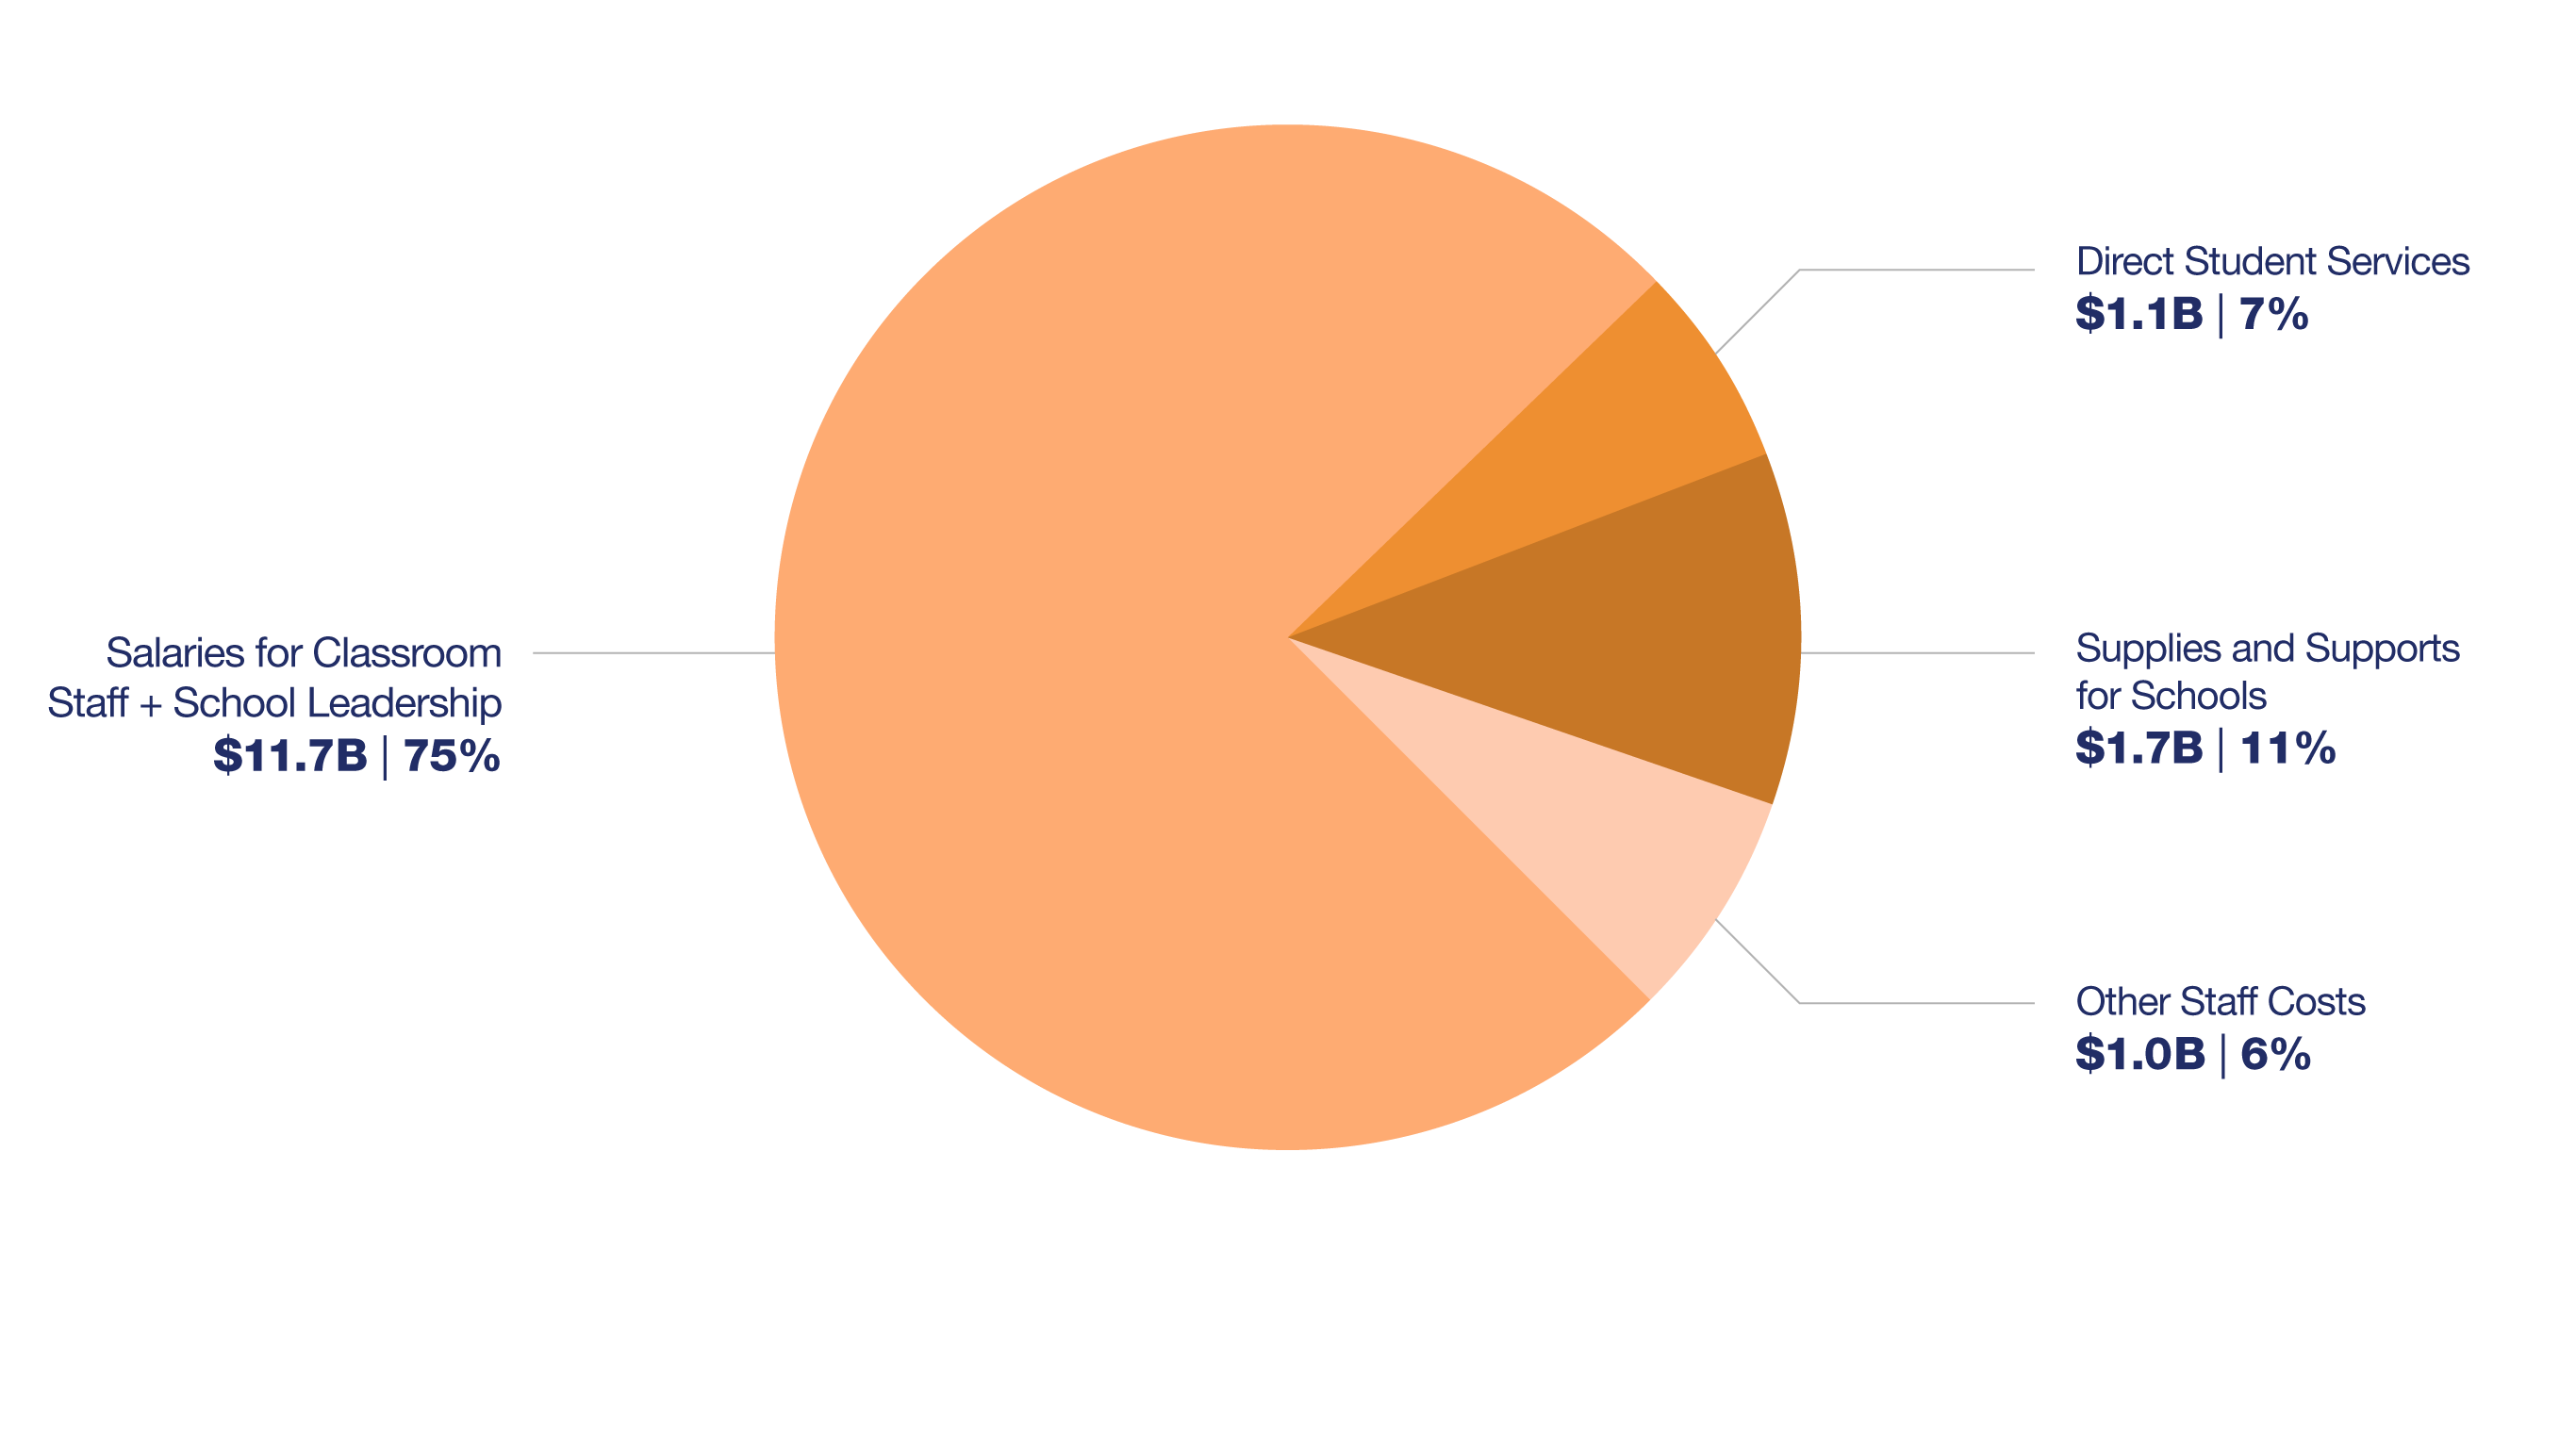 Decorative image of pie chart showing how NYCPS spends its instructional budget.